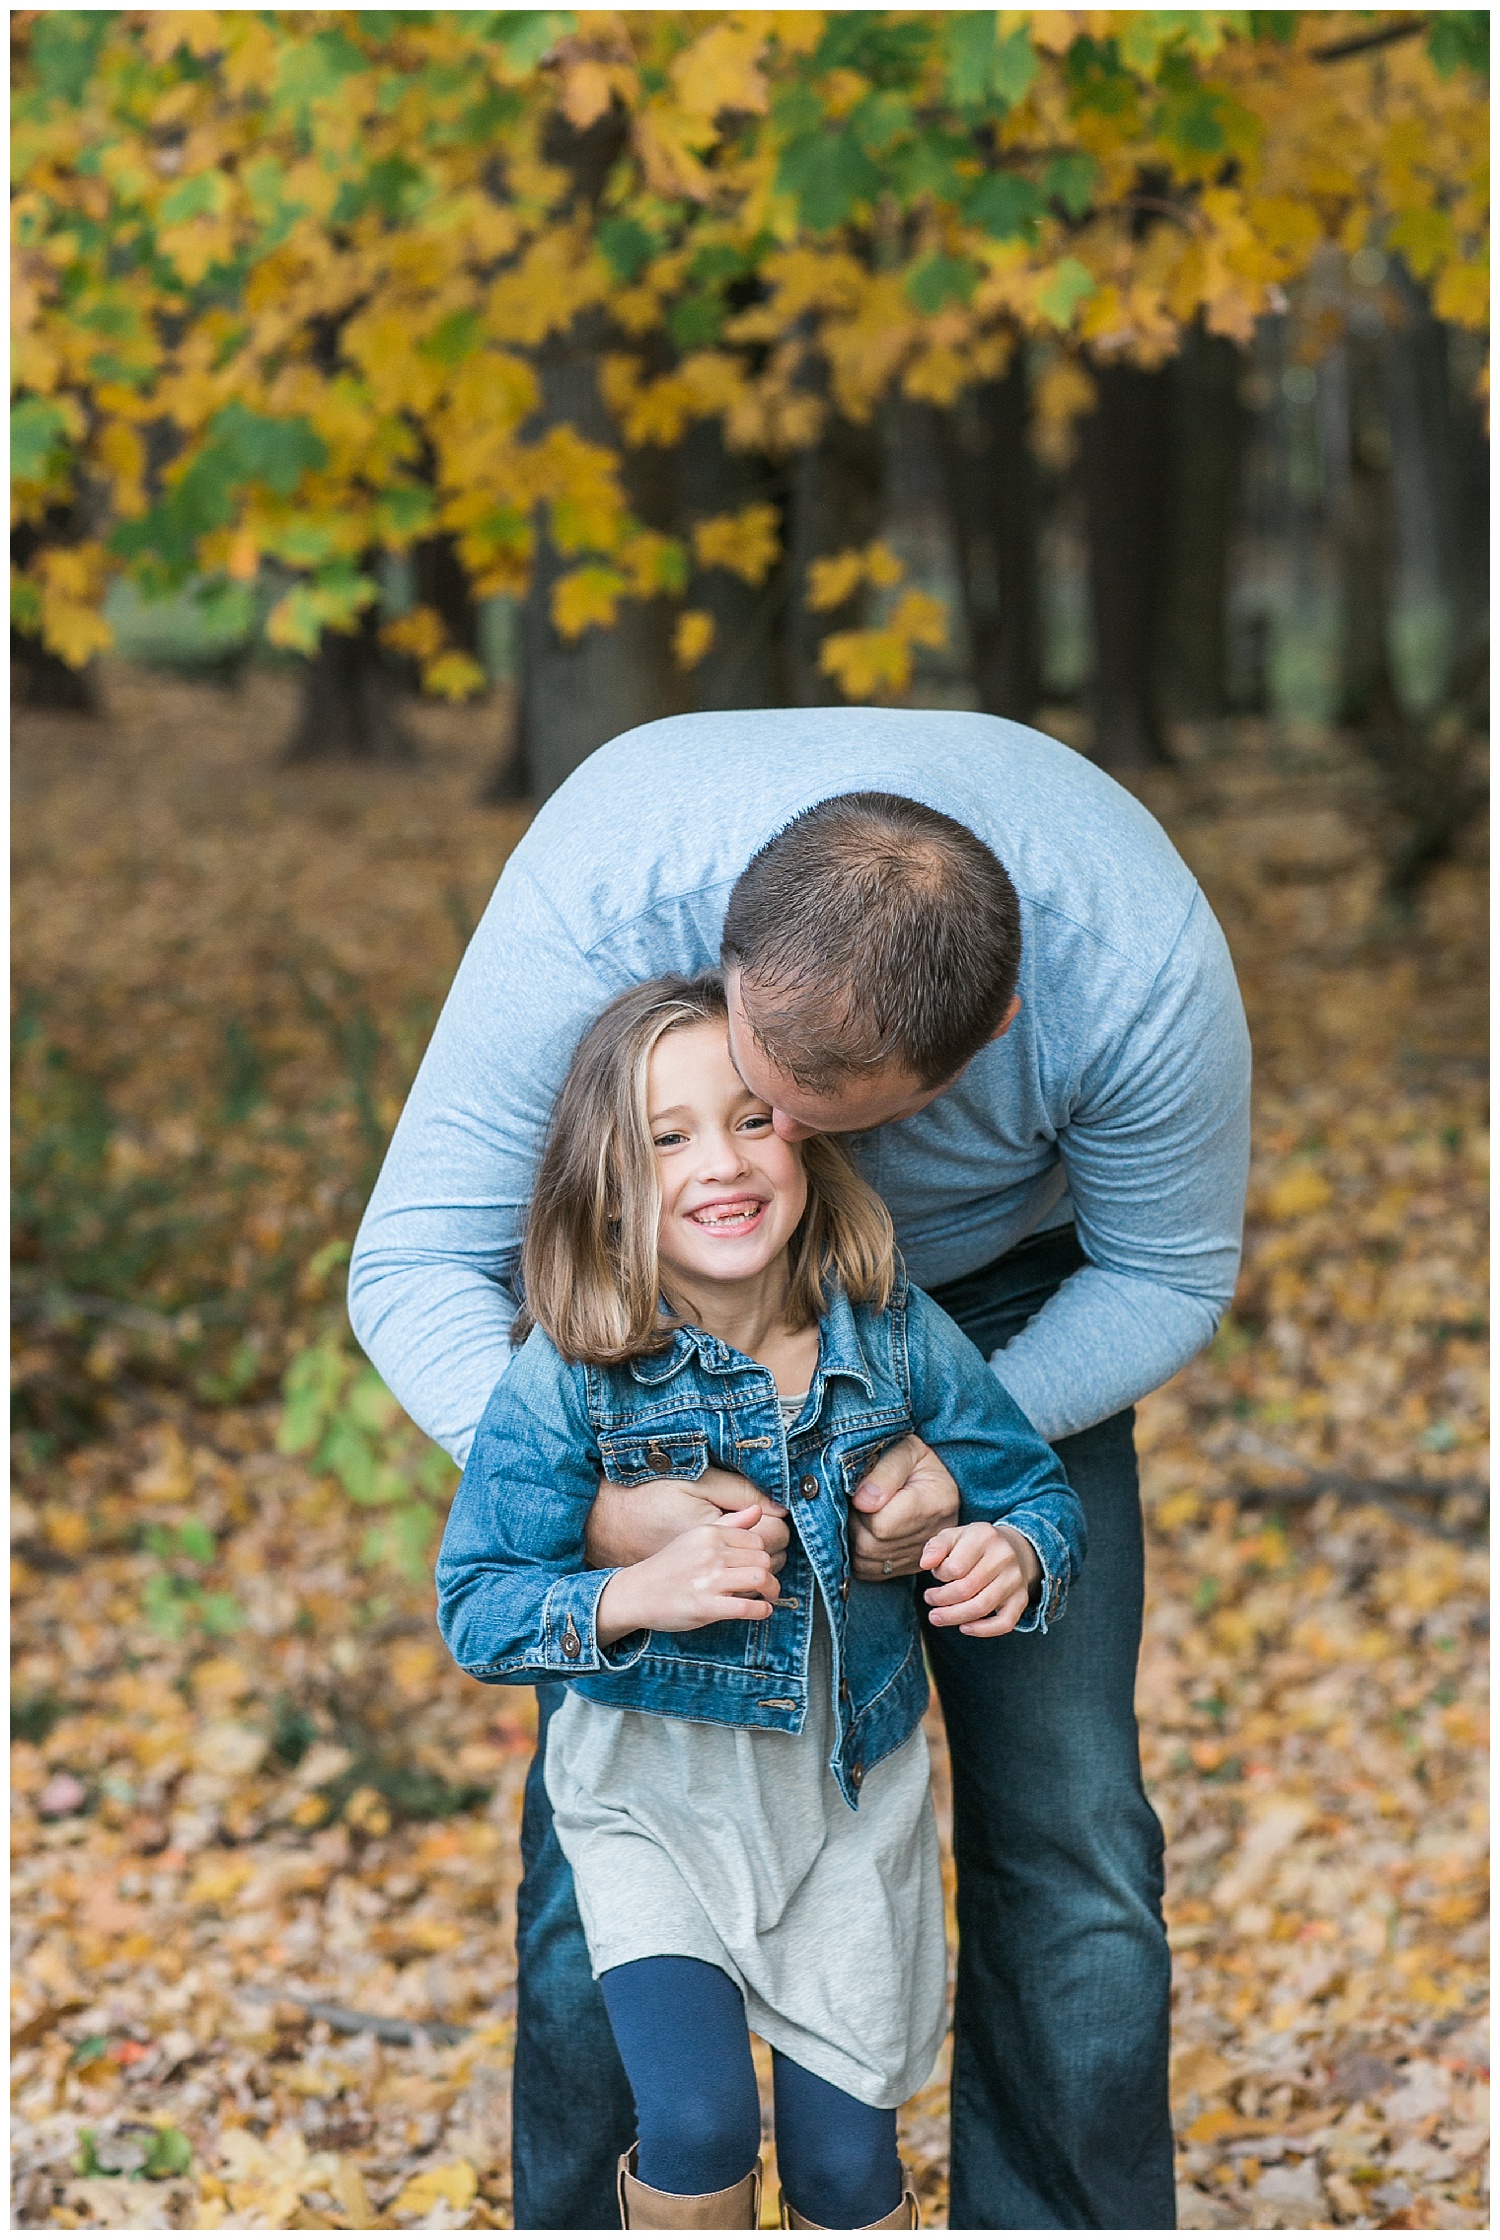 The Schurr family session at Letchworth state park - Whimsy roots photography 40.jpg